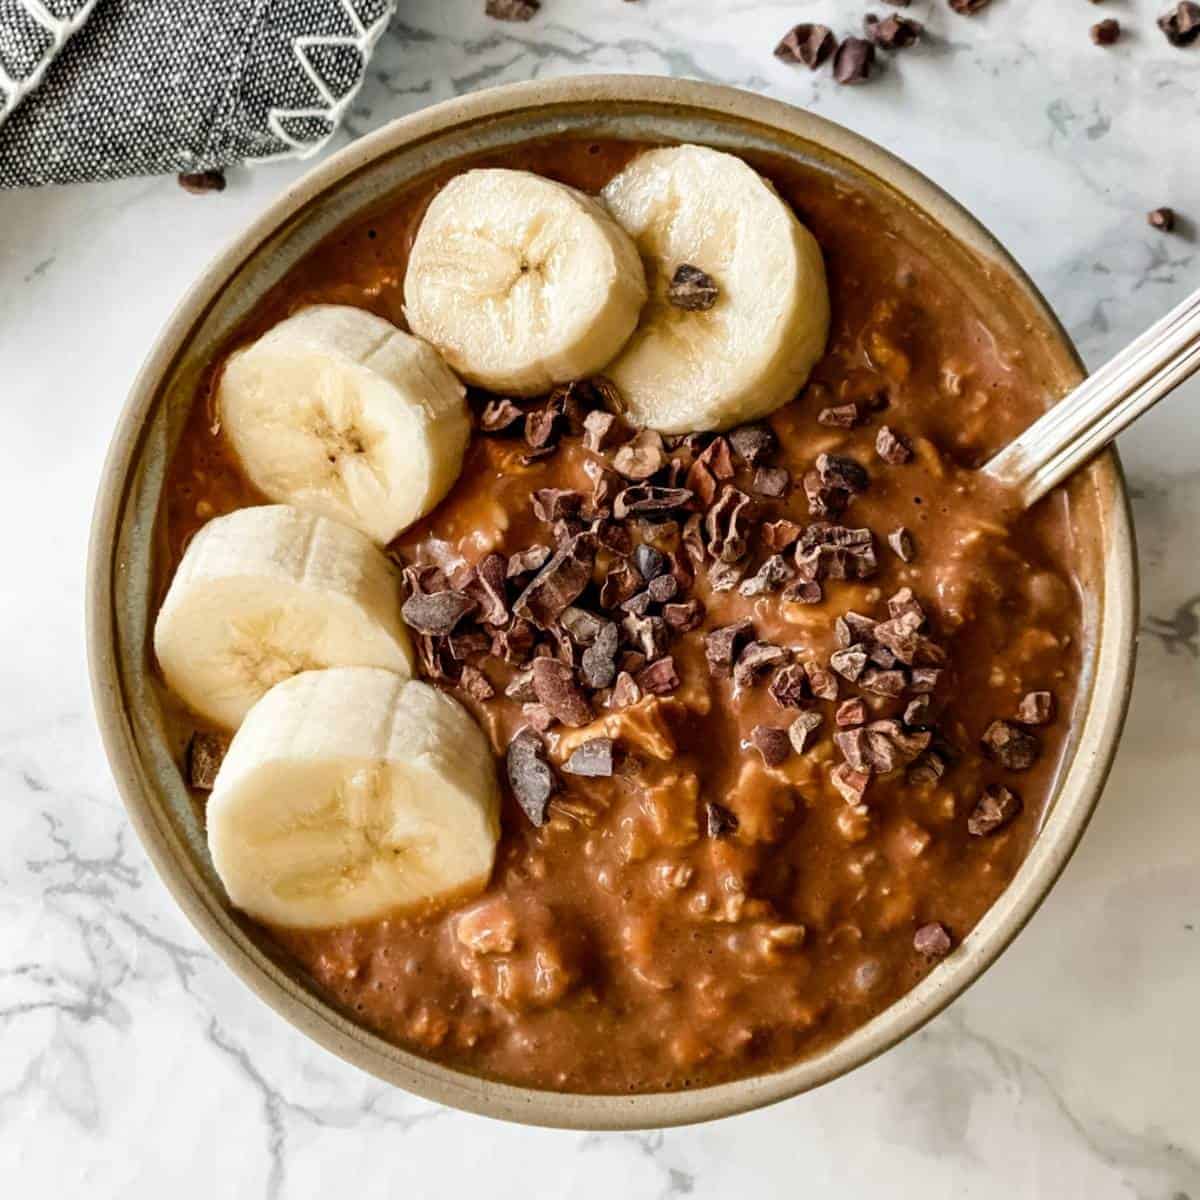 Chocolate Banana Overnight Oats in a bowl with bananas and chocolate nibs.